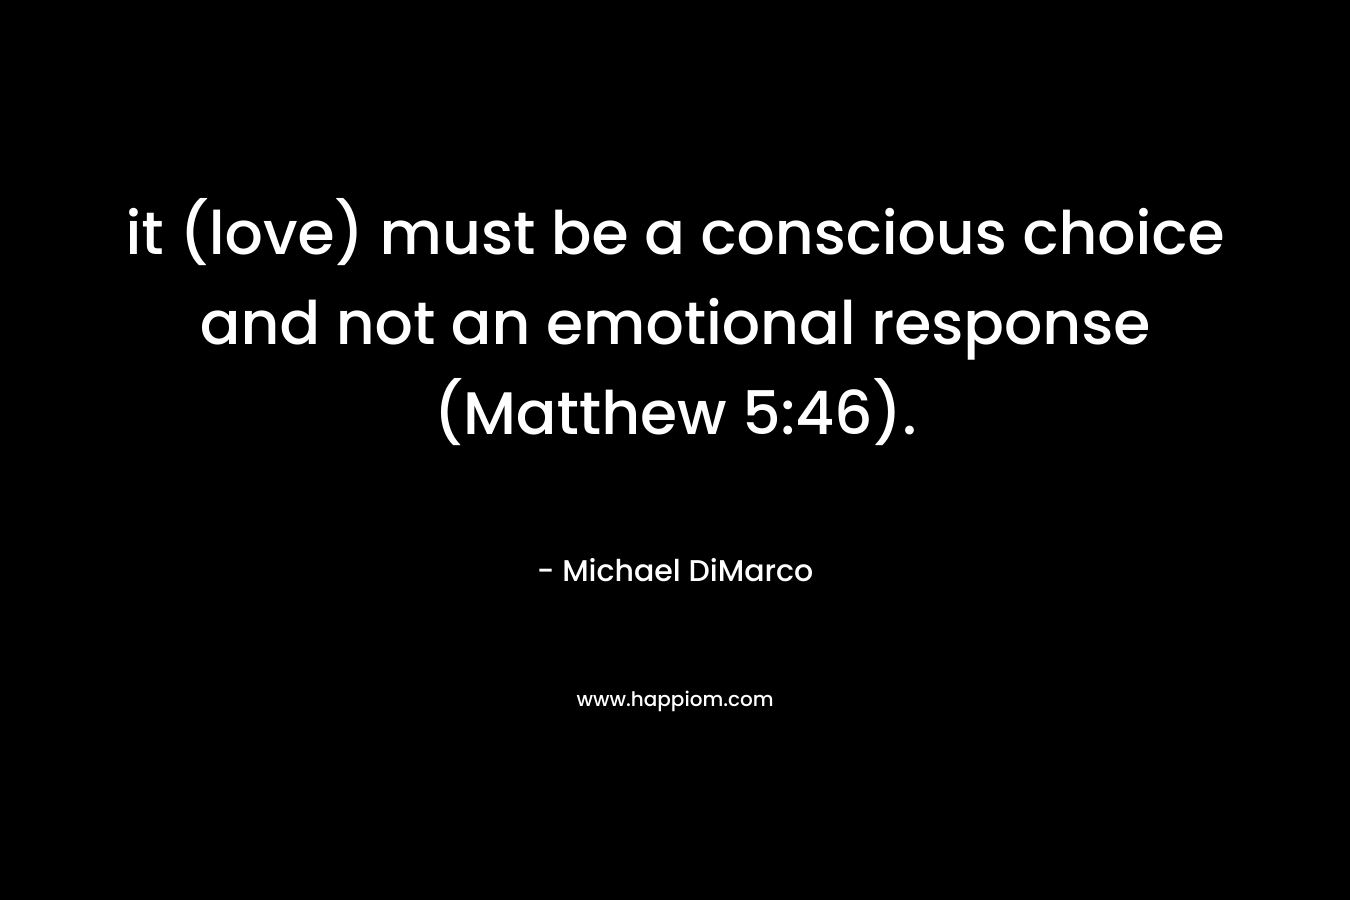 it (love) must be a conscious choice and not an emotional response (Matthew 5:46).